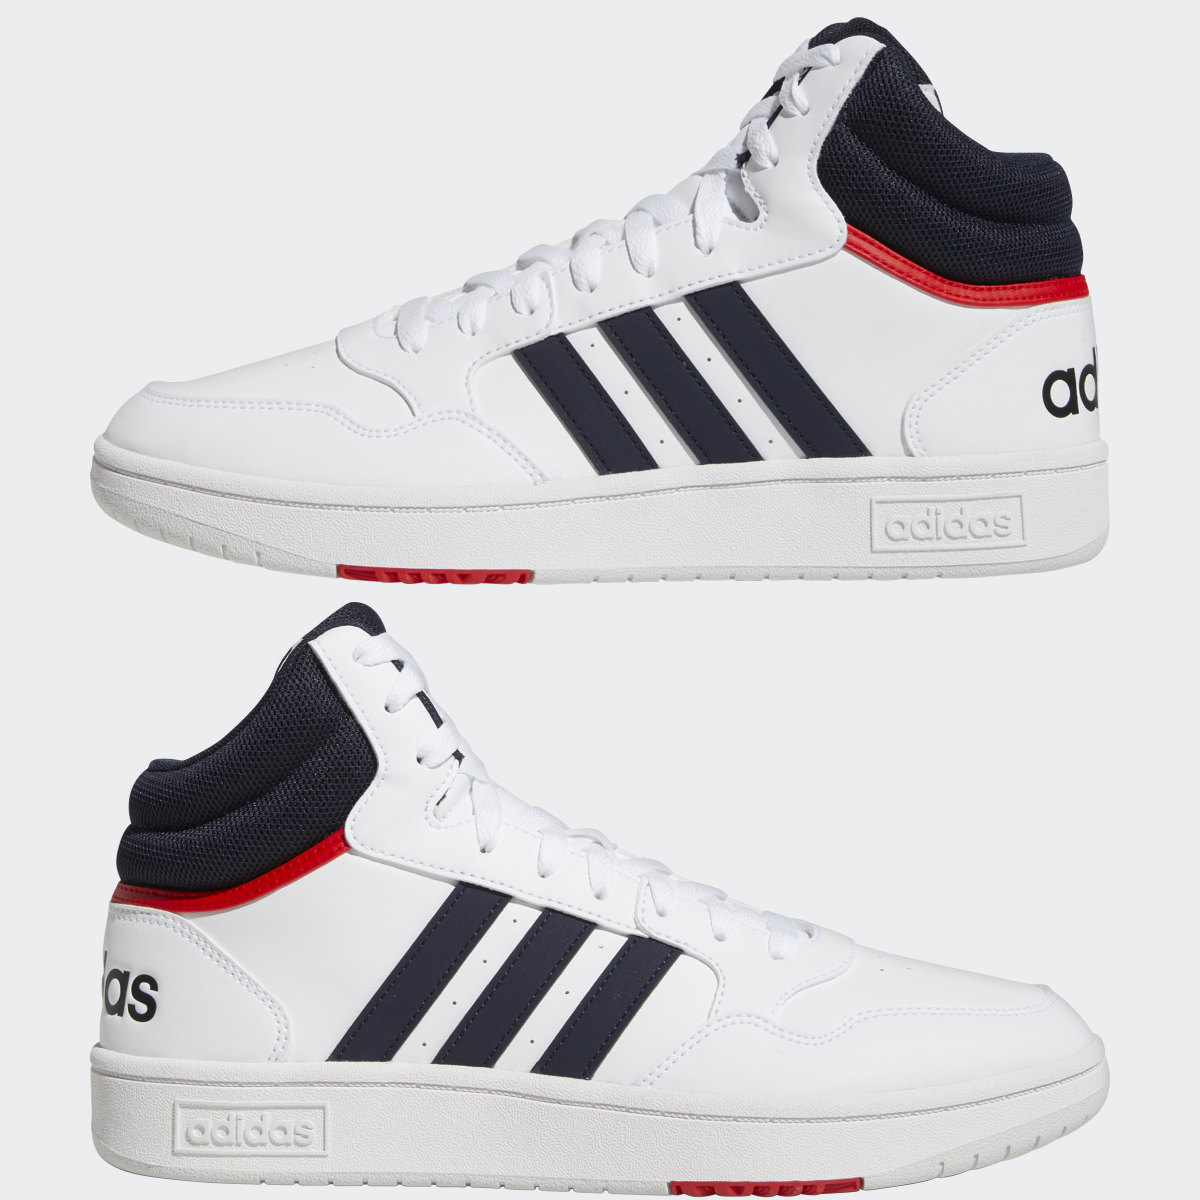 Adidas Hoops 3.0 Mid Classic Vintage Shoes. 8